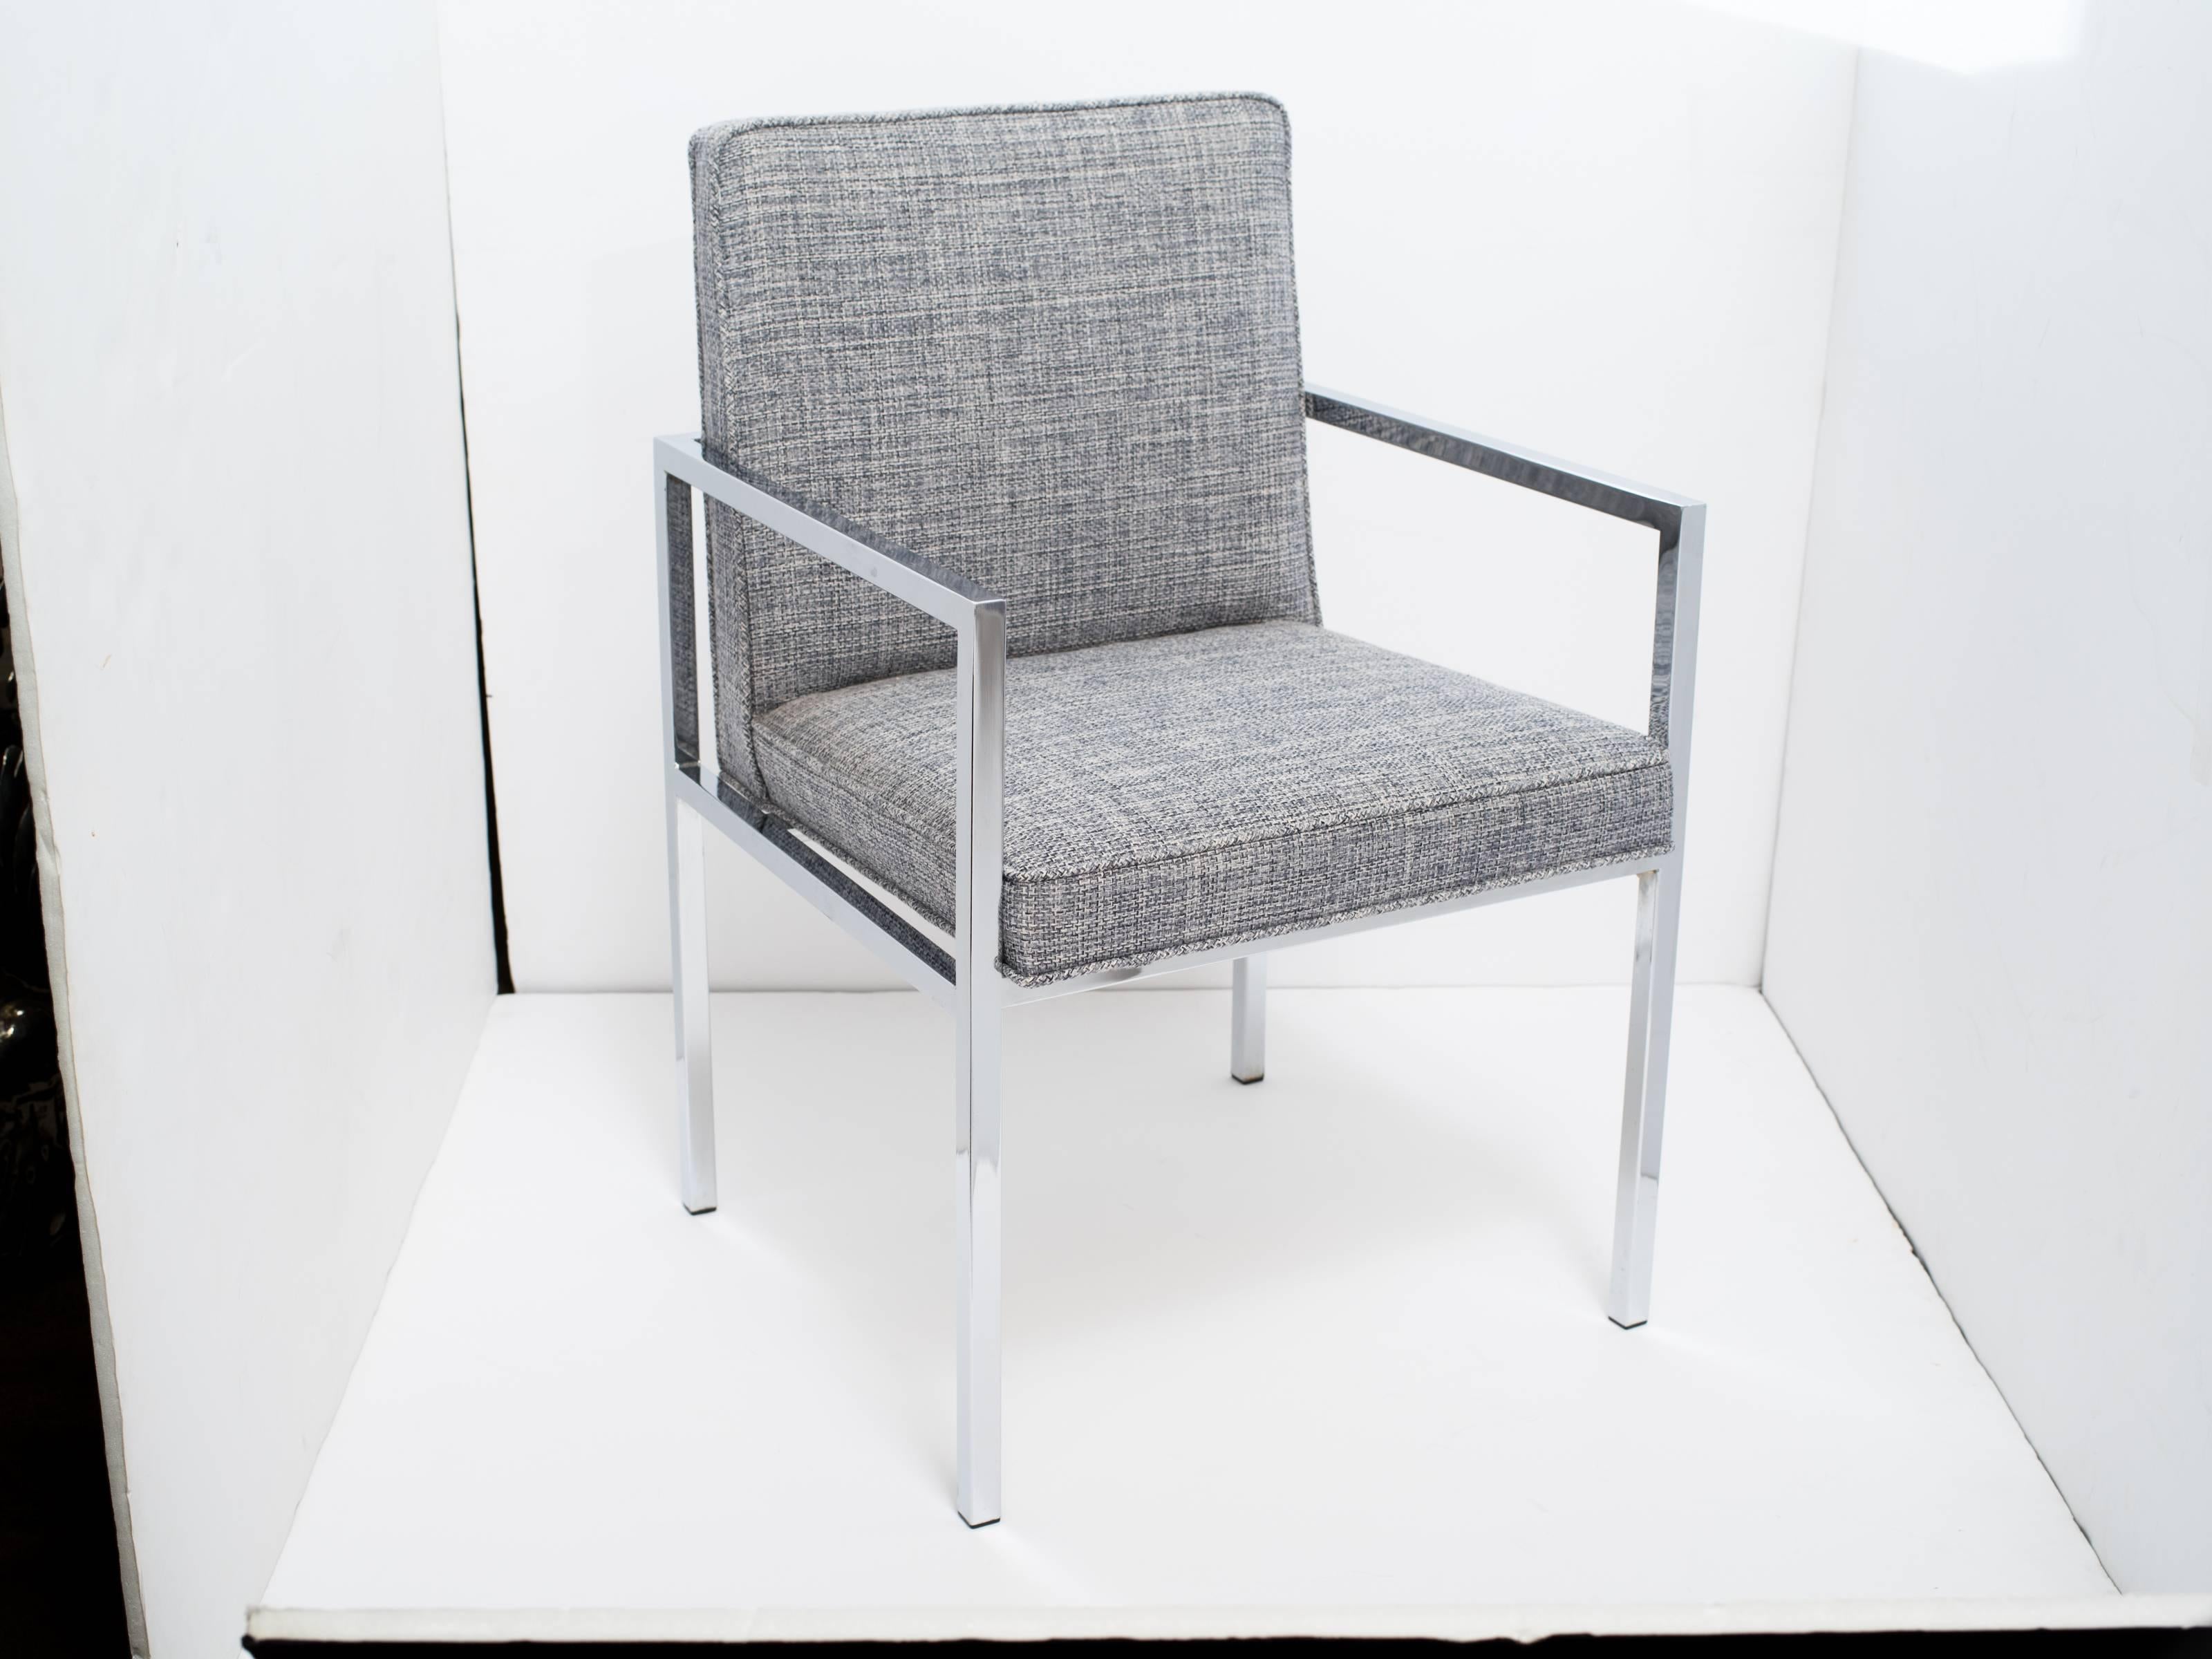 Mid-century modern desk chair or side chair with sleek cantilevered frame in polished chromed steel. Upholstered in woven tweed Rogers & Goffigon fabric in hues of steel blue and grey heather (cotton/linen).